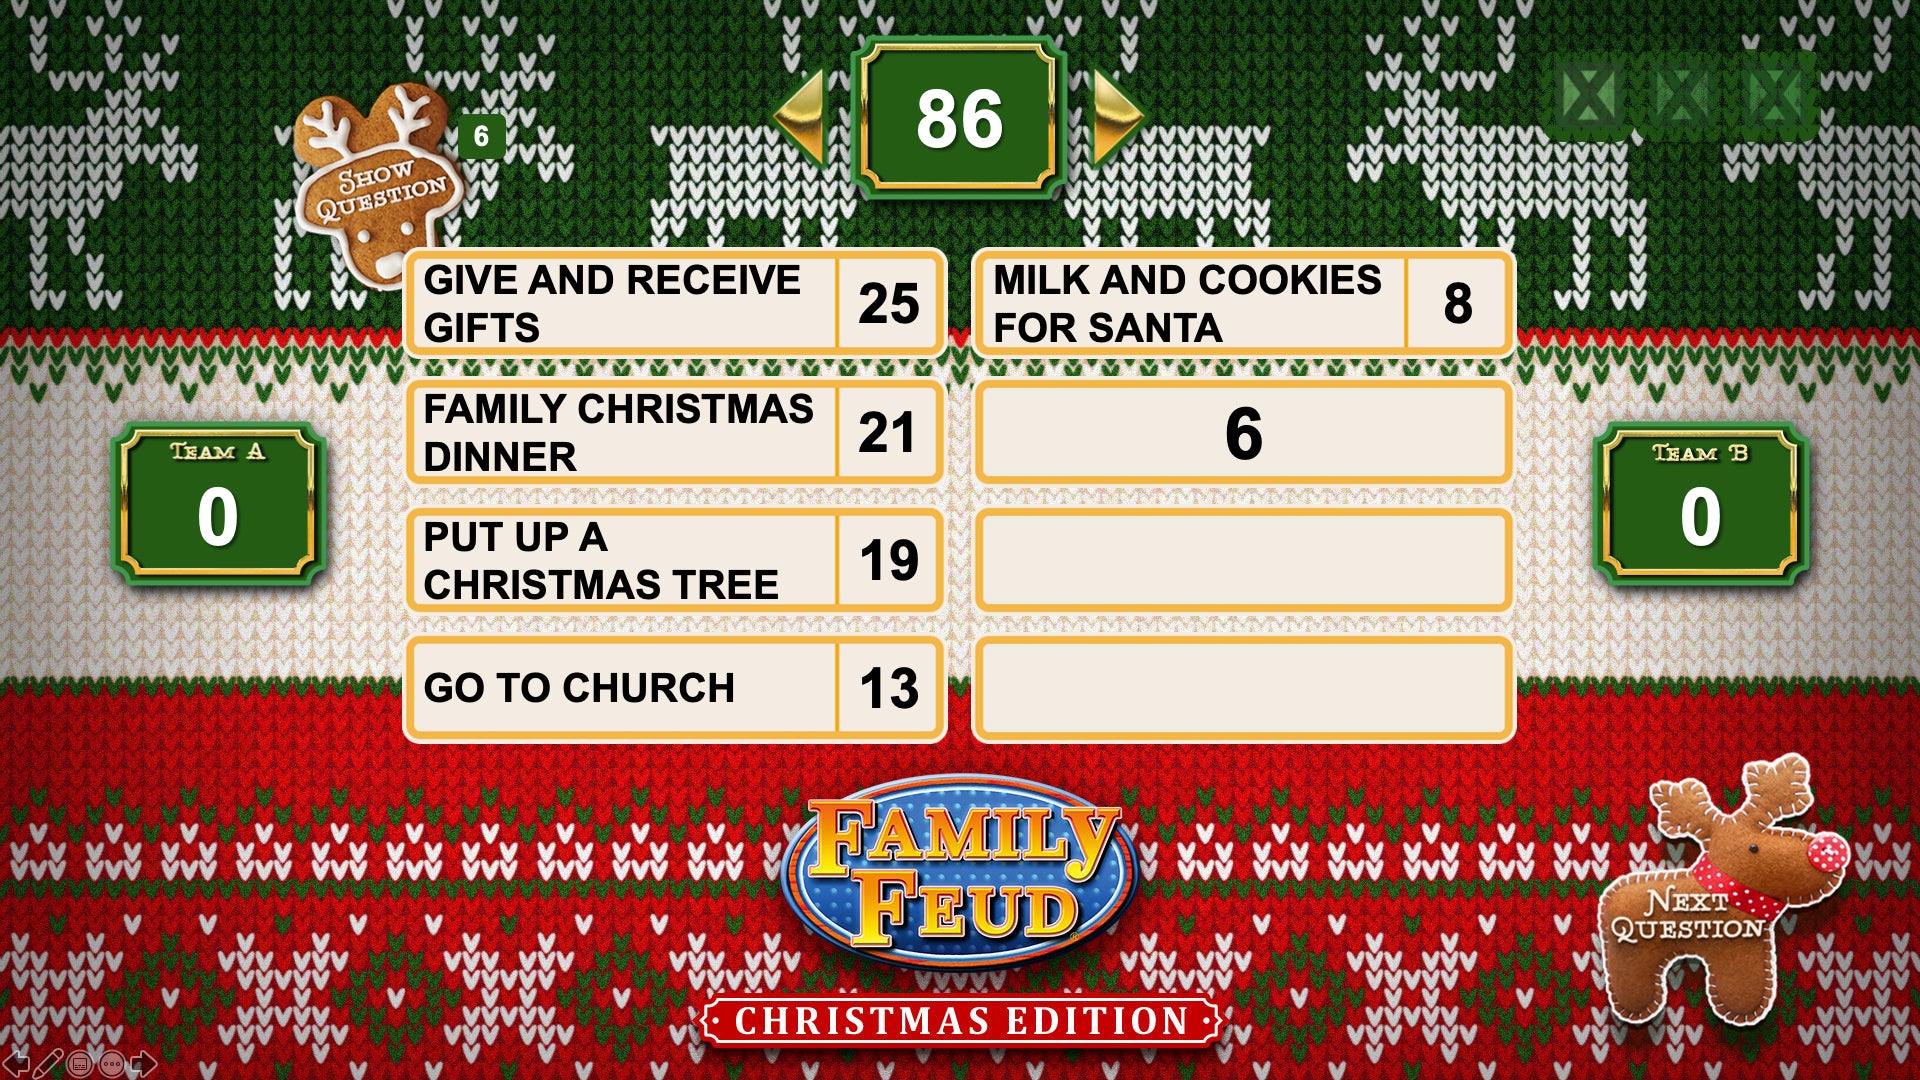 Family Feud for a Group Questions.pdf - Google Drive  Family feud game,  Family feud, Fun christmas party games